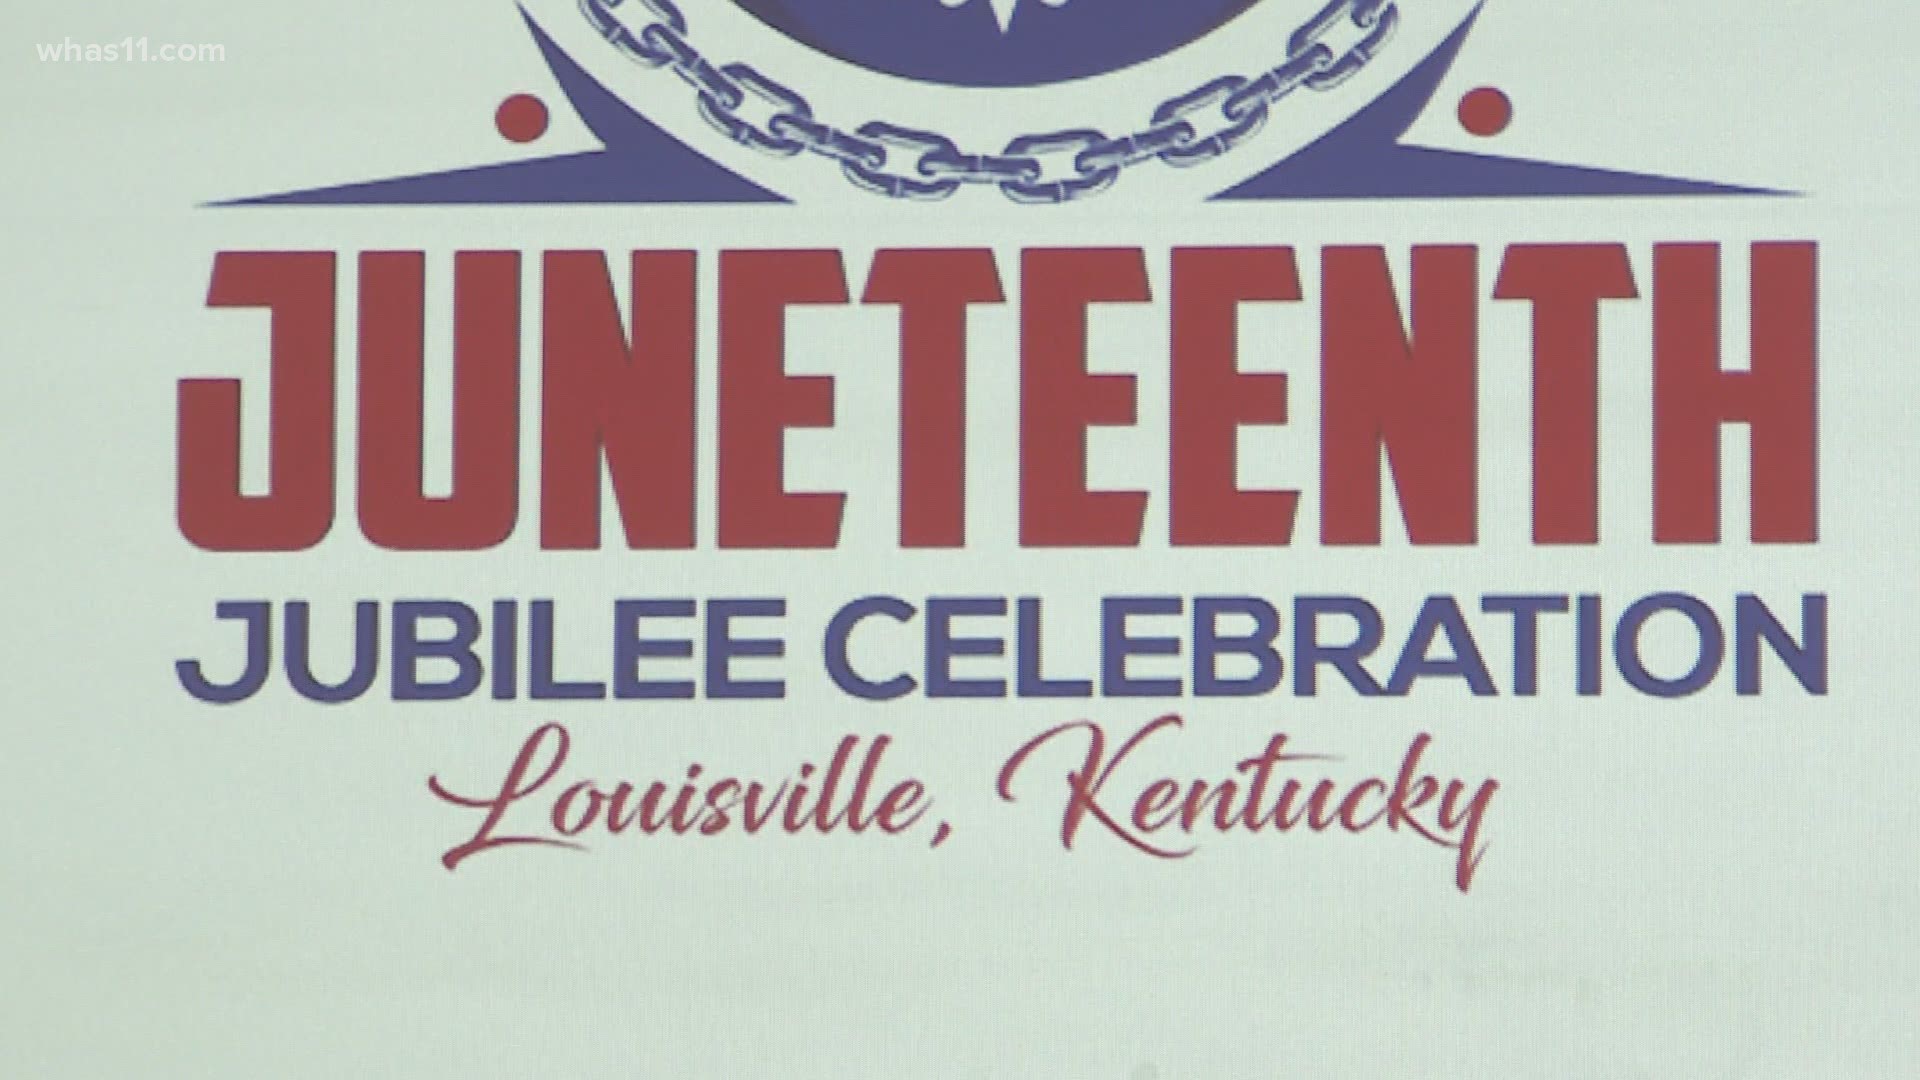 The Juneteenth Jubilee Commission helps organize events celebrating Juneteenth's historical significance in Louisville.